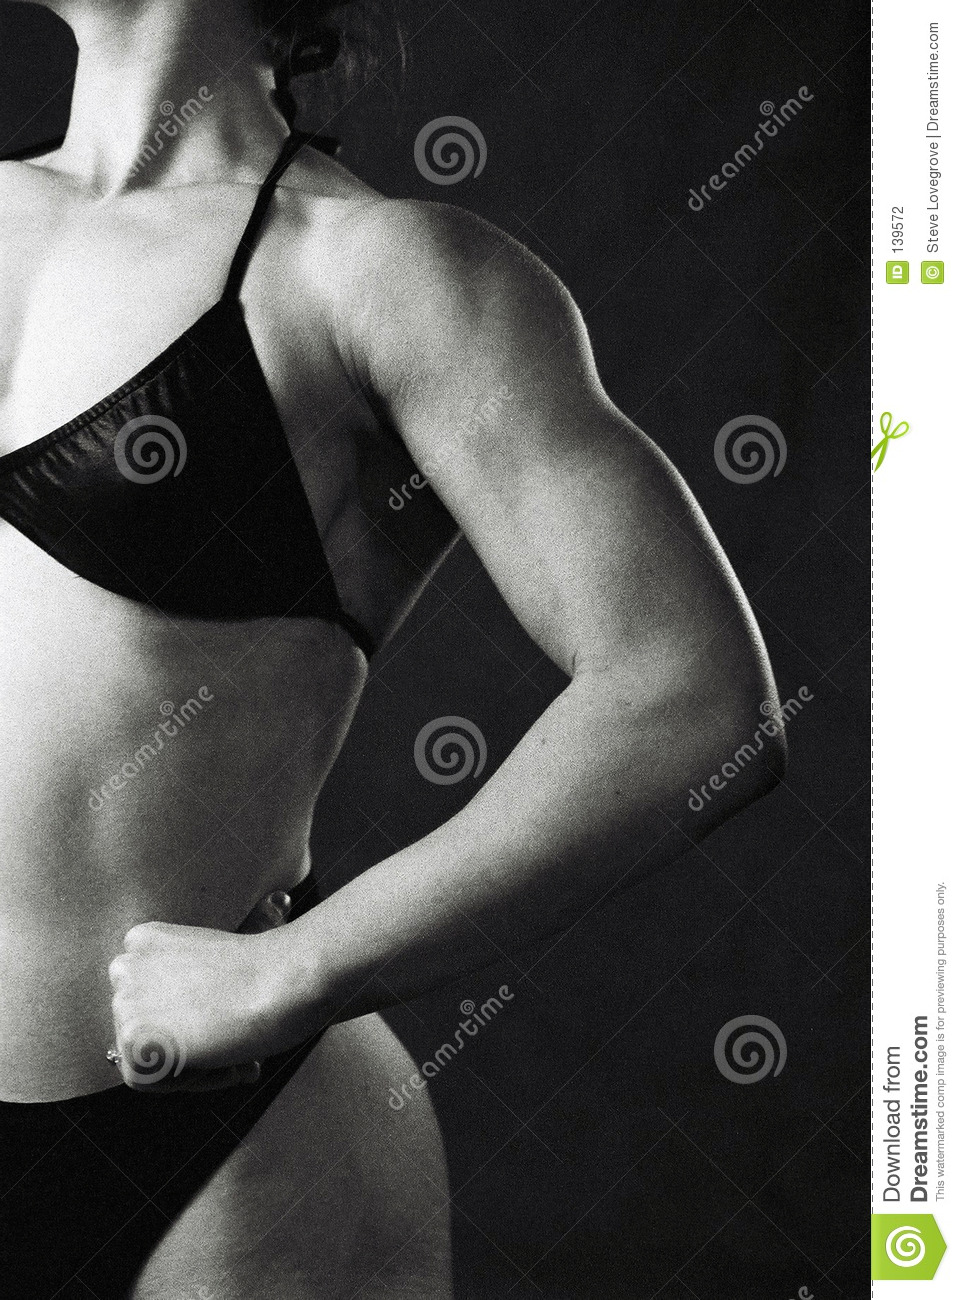 Female Bodybuilder In Competition Pose Photographed On Infra Red